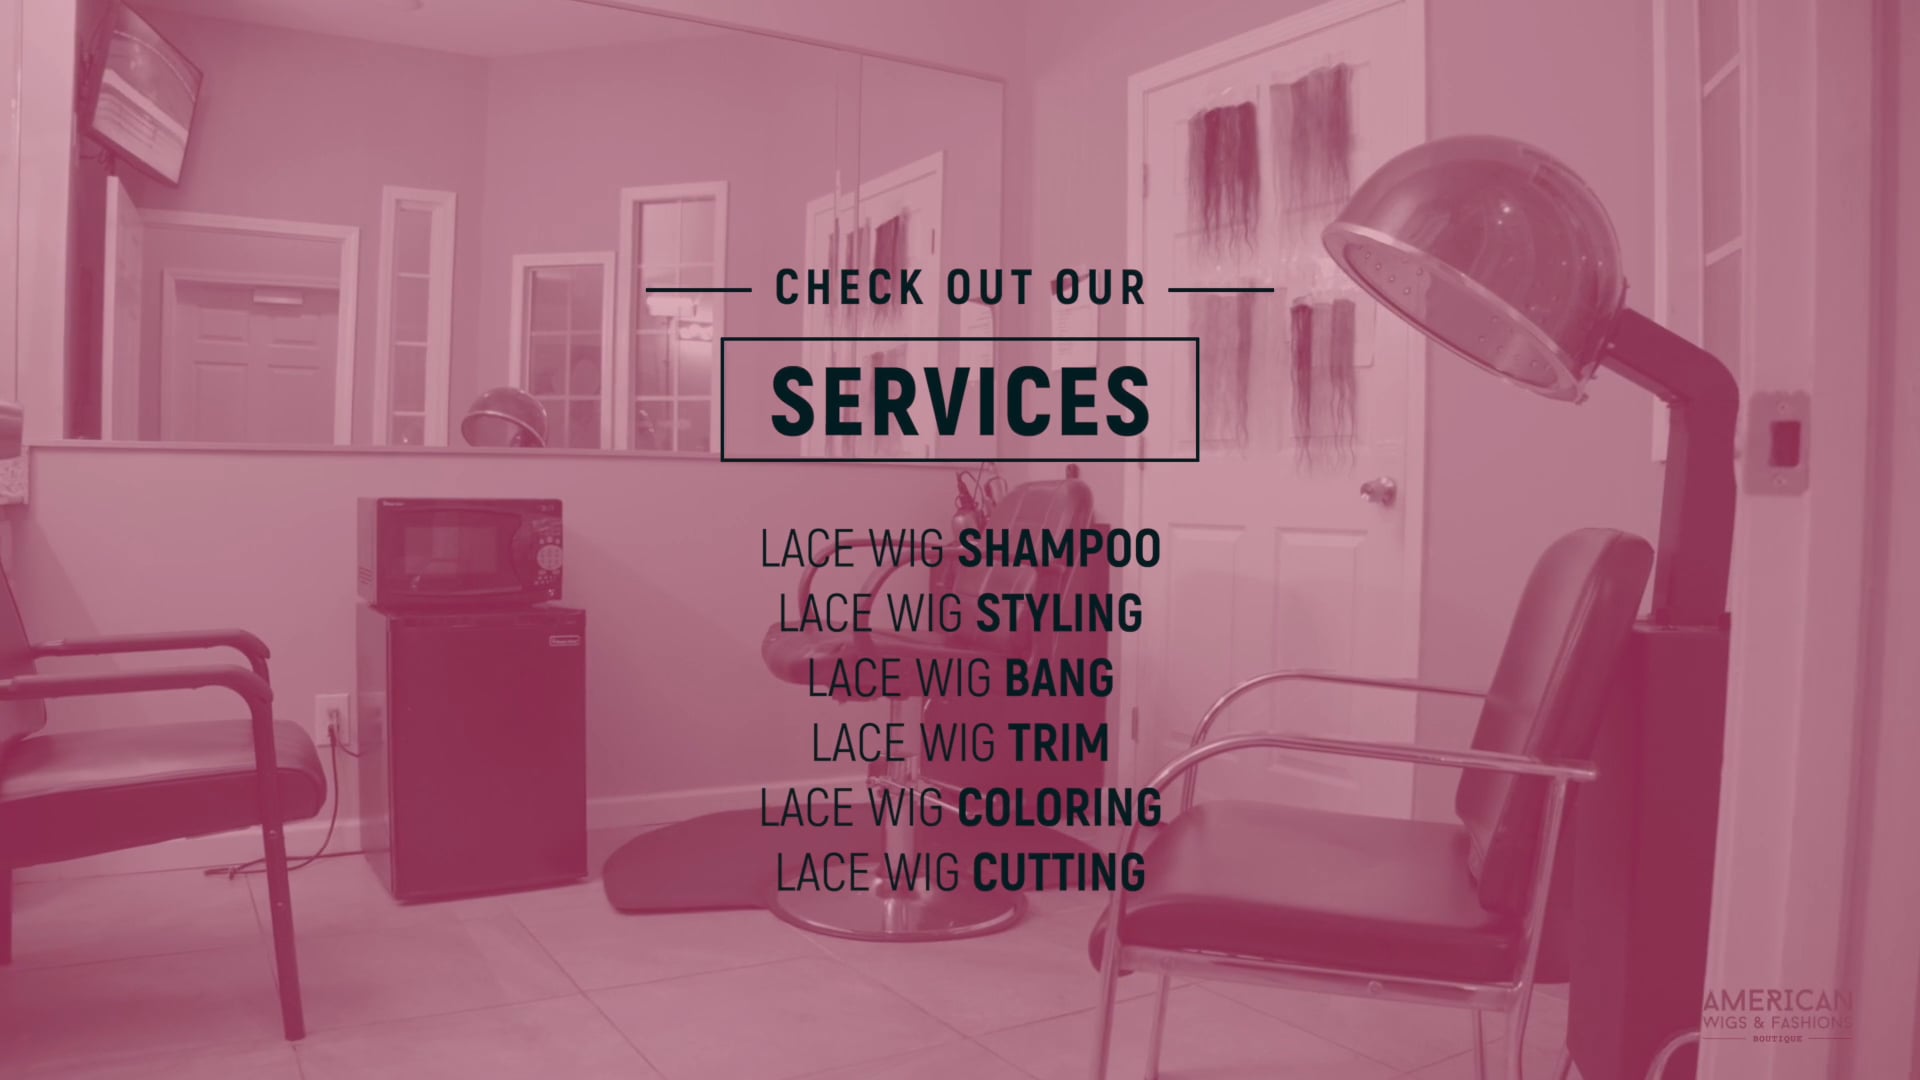 American Wigs & Fashions: Services